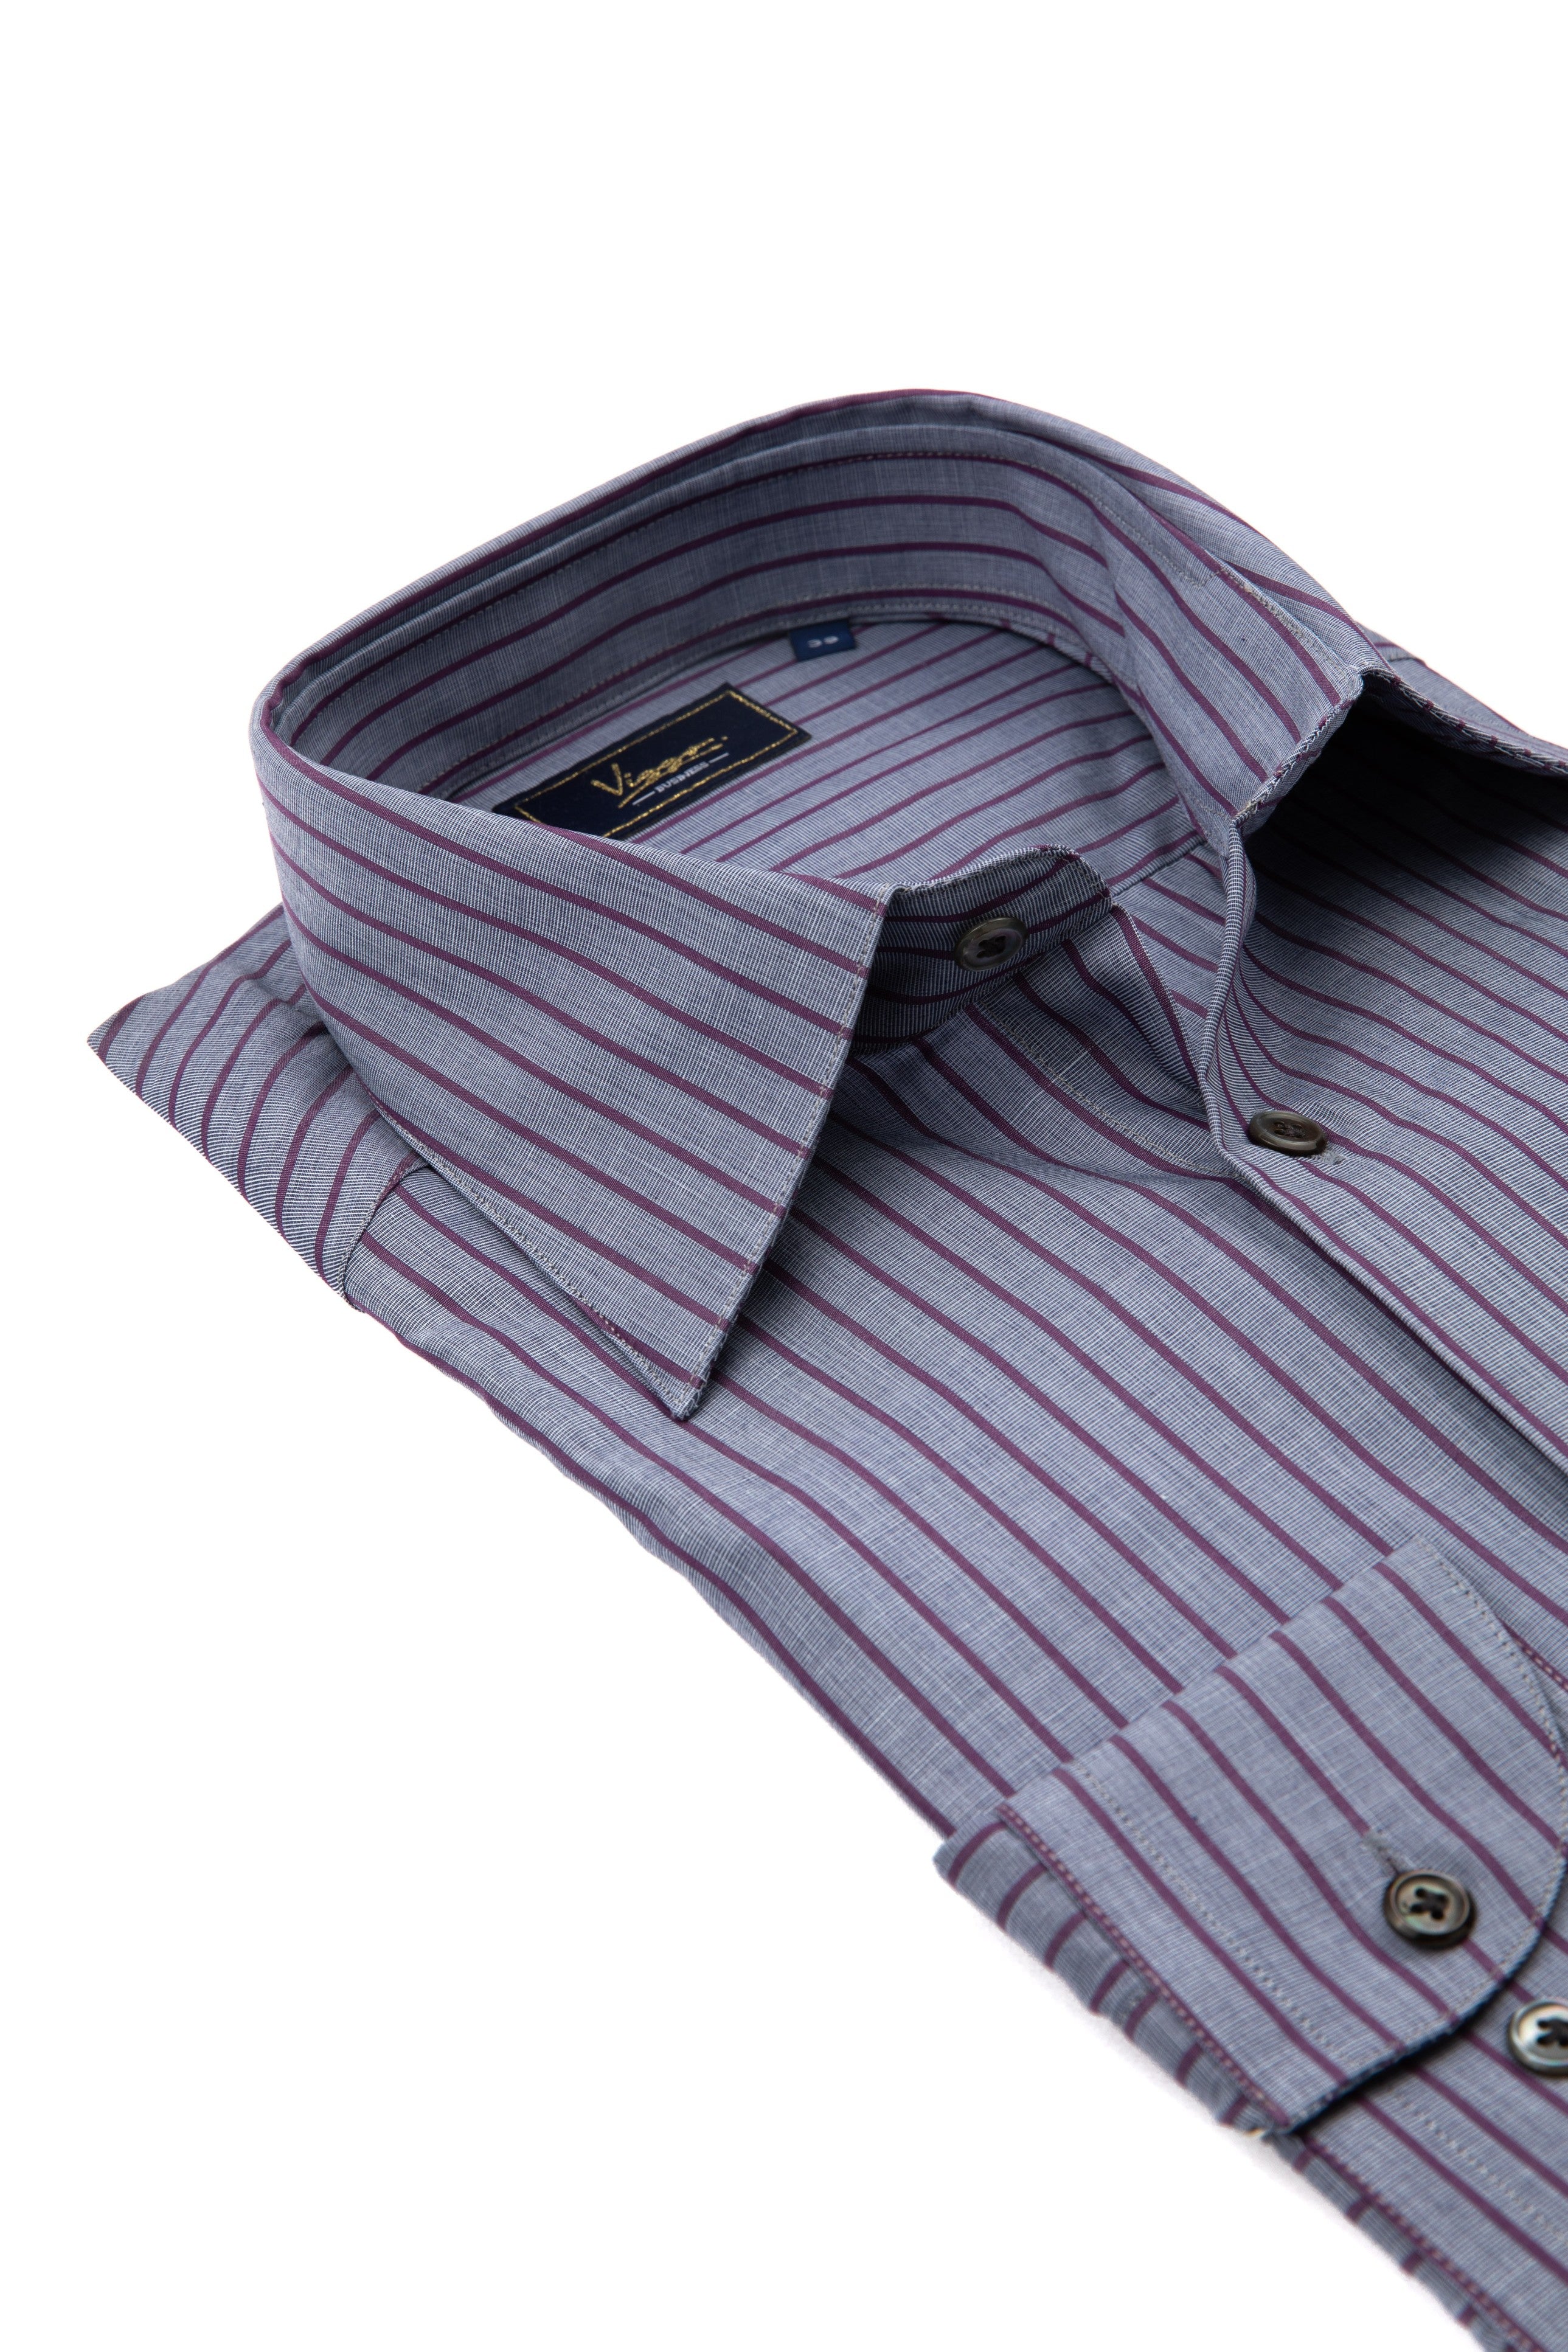 Gray Business Shirt With Purple Stripes